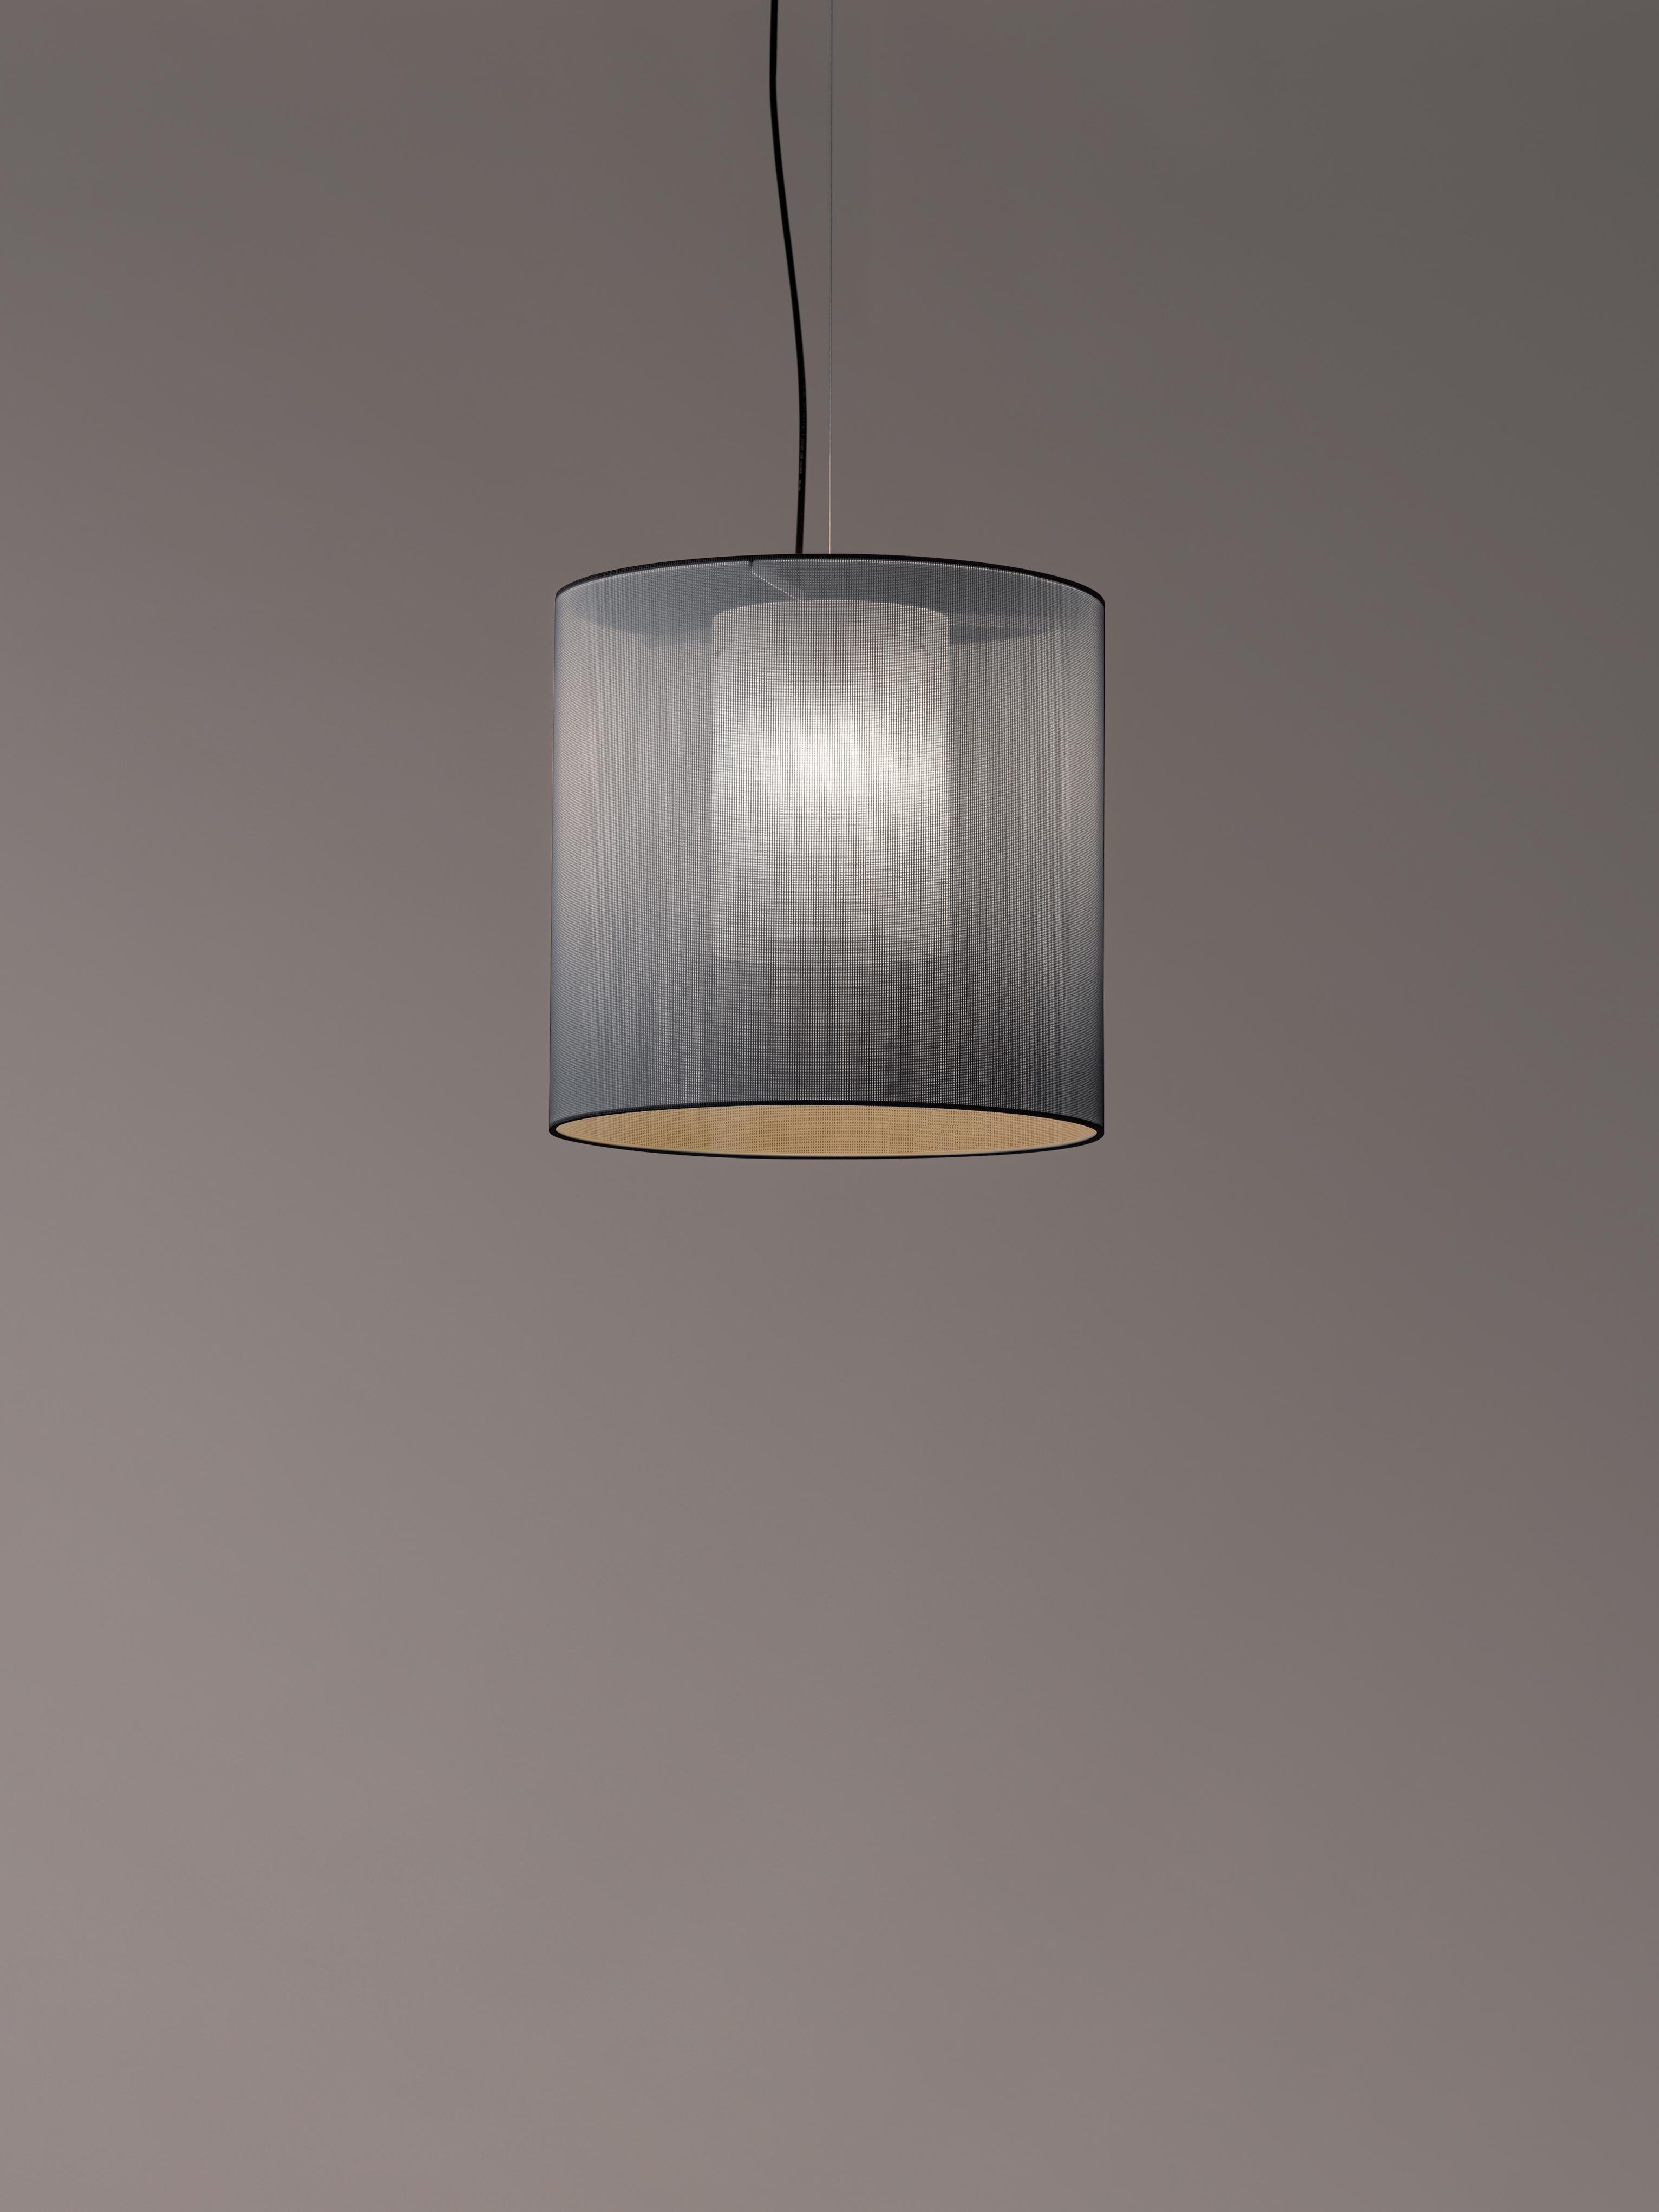 Grey Moaré M pendant lamp by Antoni Arola
Dimensions: D 46 x H 45 cm
Materials: metal, polyester.
Available in other colors and sizes.

Moaré’s multiple combinations of formats and colours make it highly versatile. The series takes its name